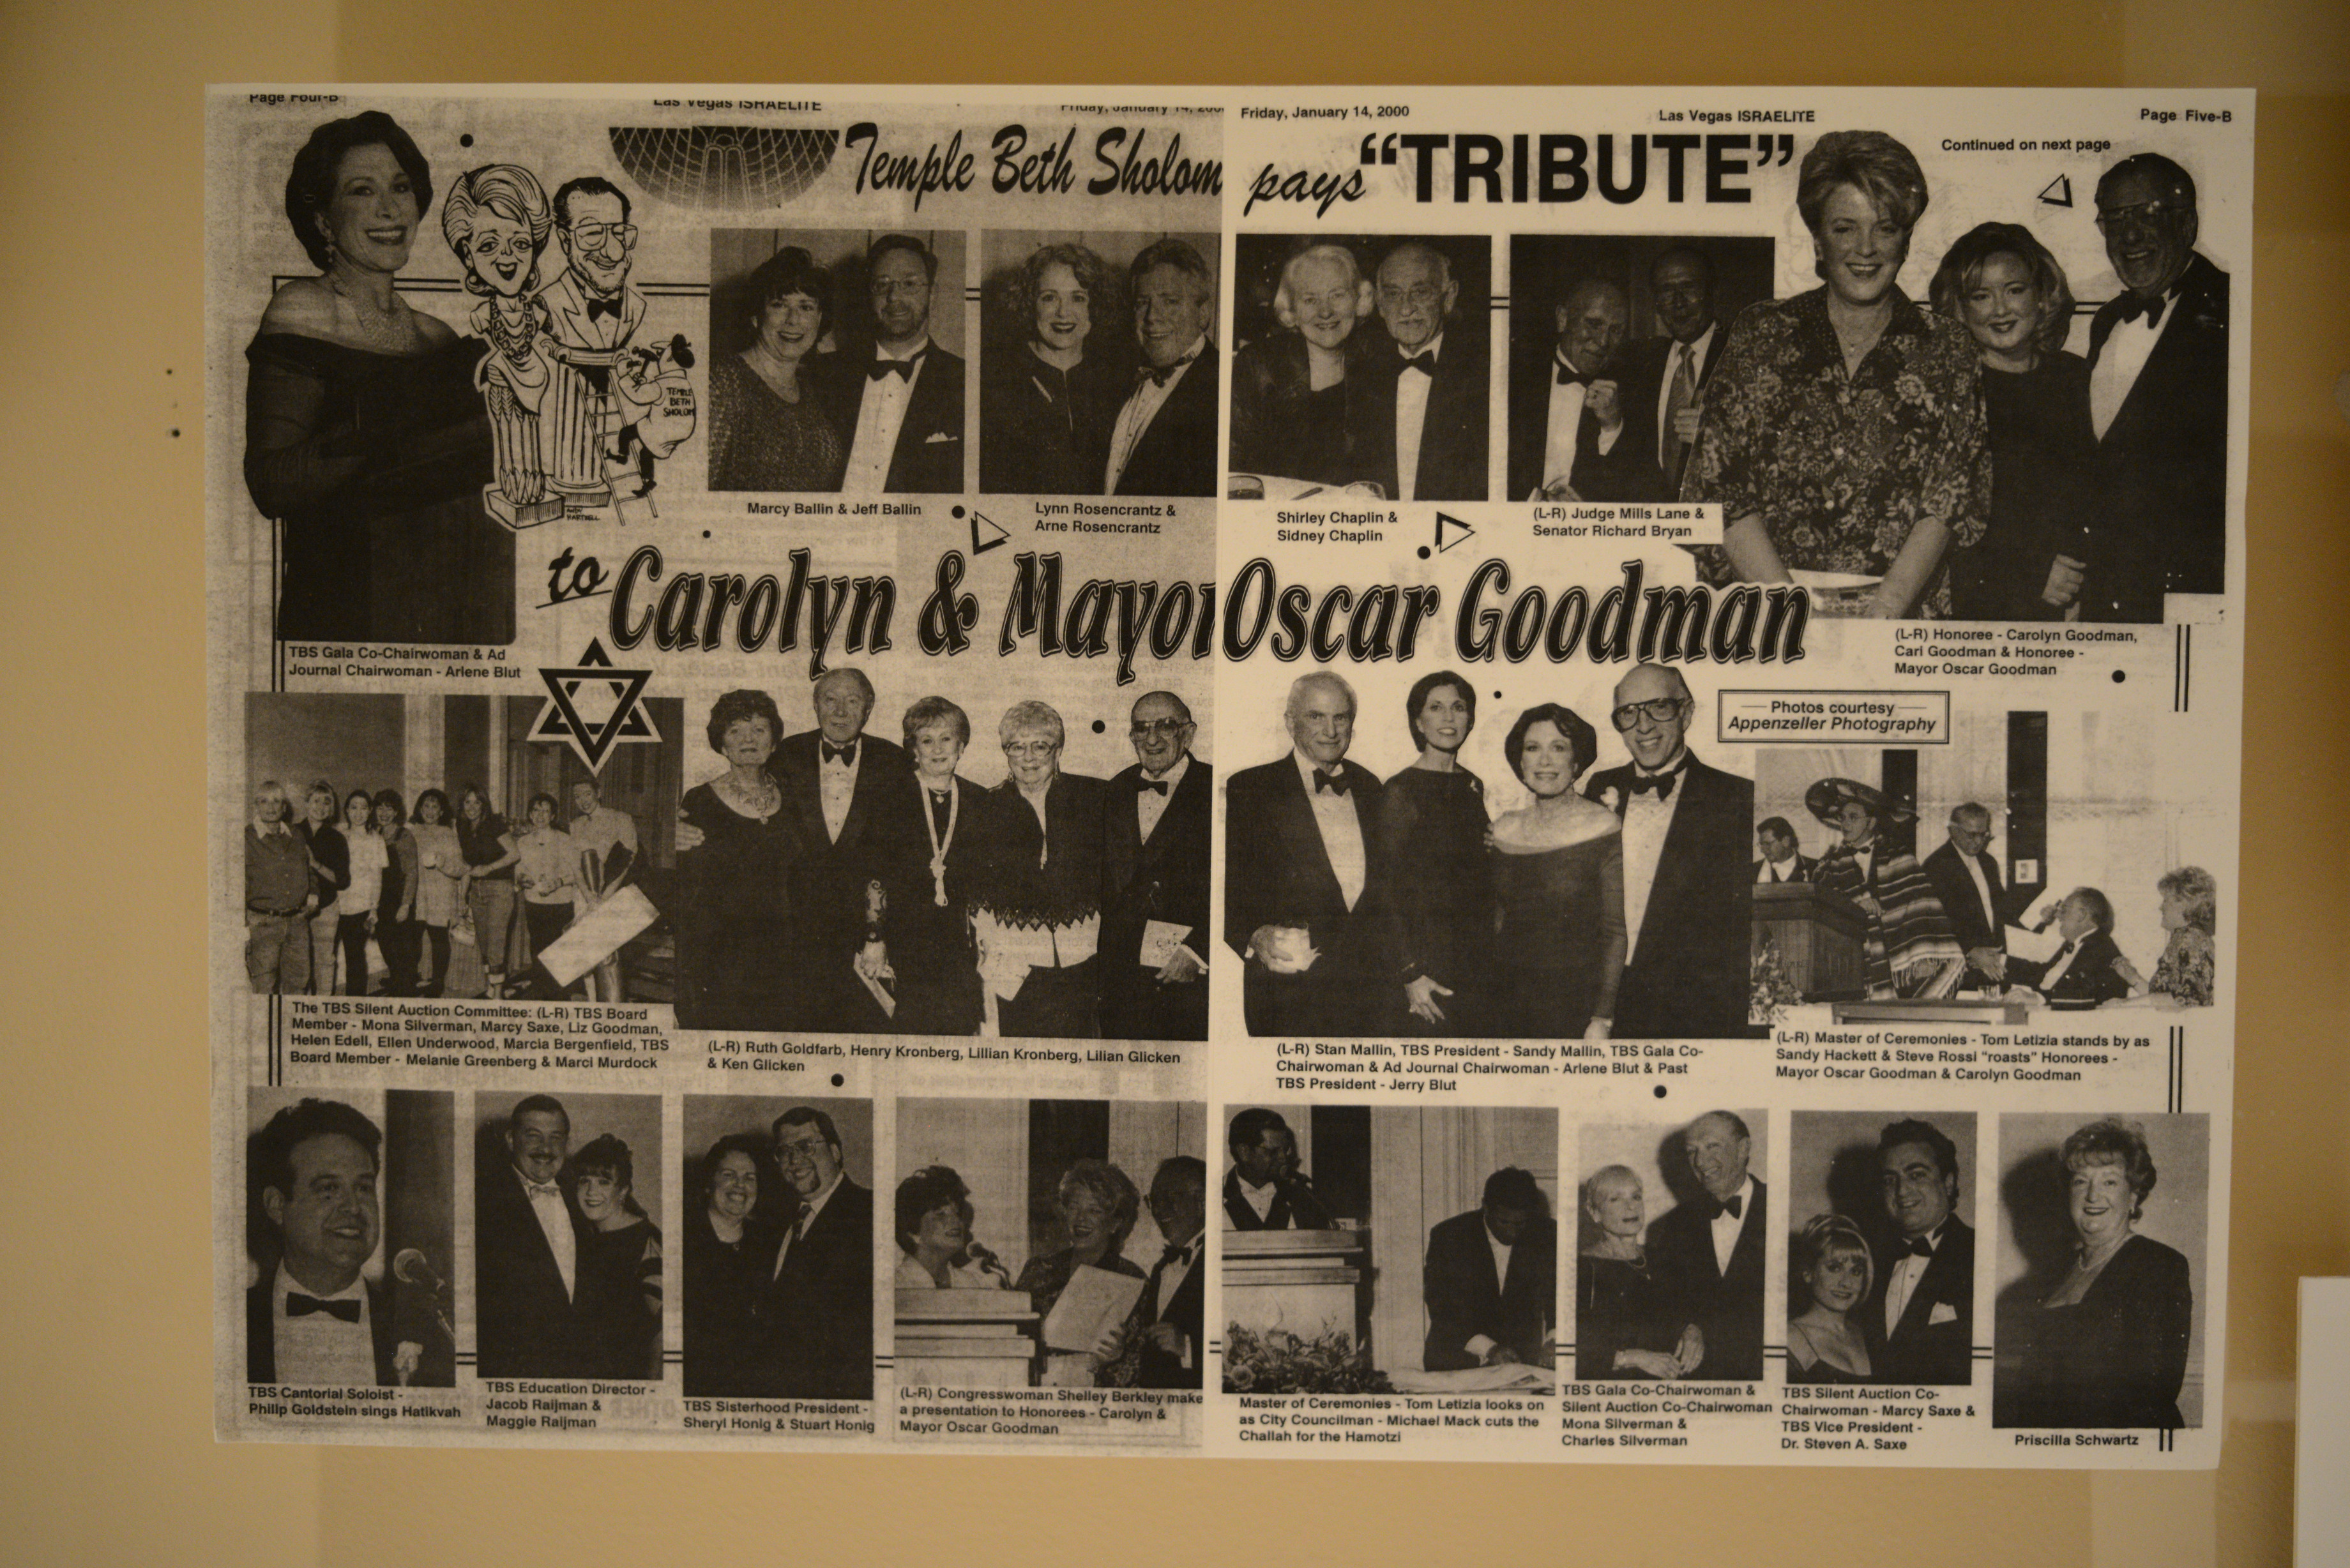 Photograph of newspaper clipping, Temple Beth Sholom pays tribute to Carolyn and Mayor Oscar Goodman, Las Vegas Israelite, January 14, 2000